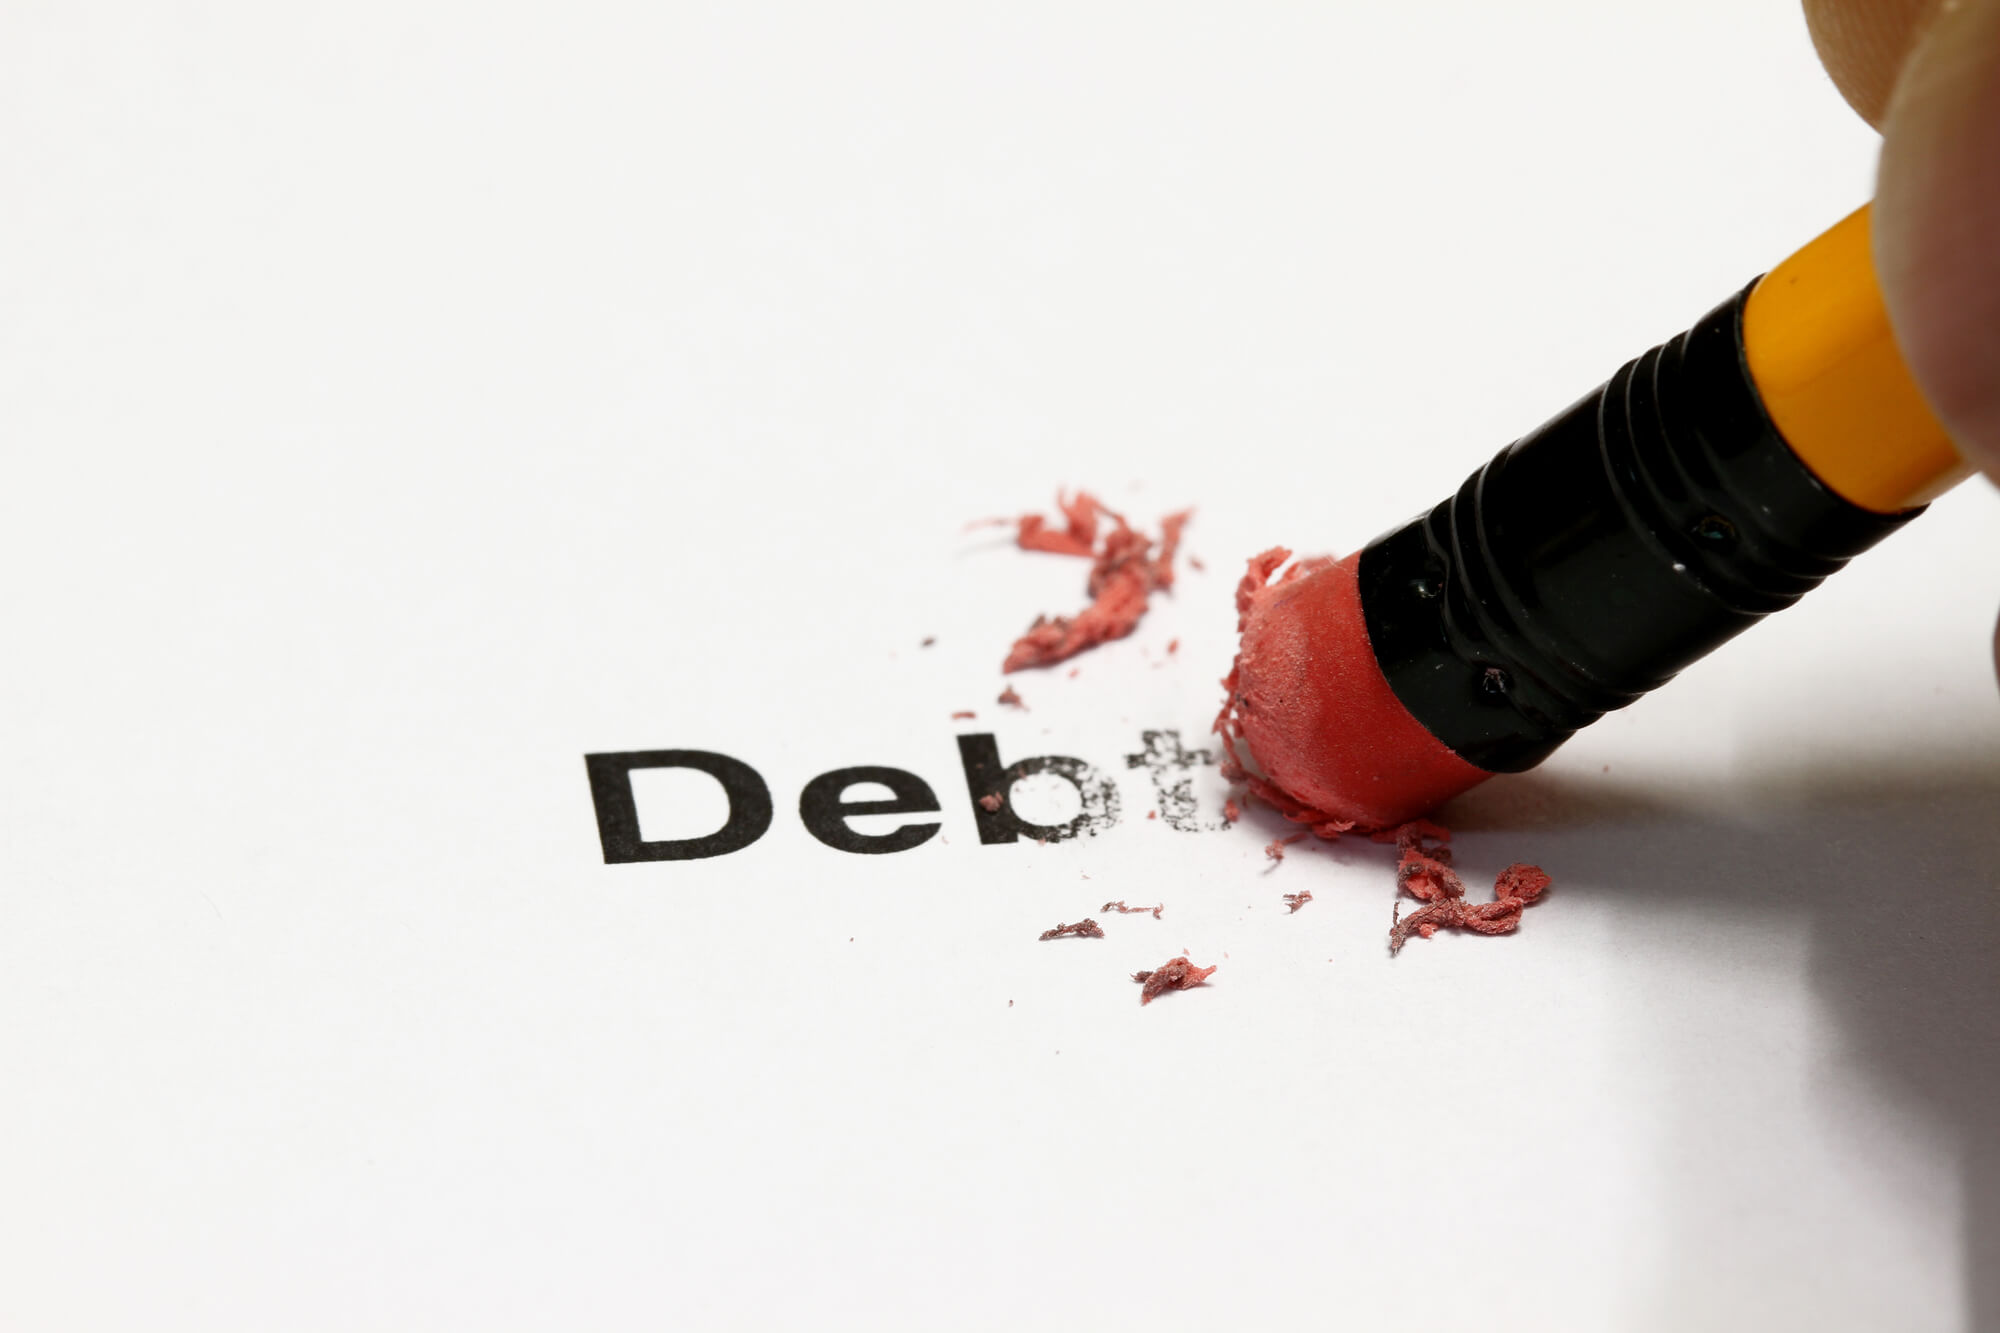 Erasing "debt" with Payday Loan Debt Assistance